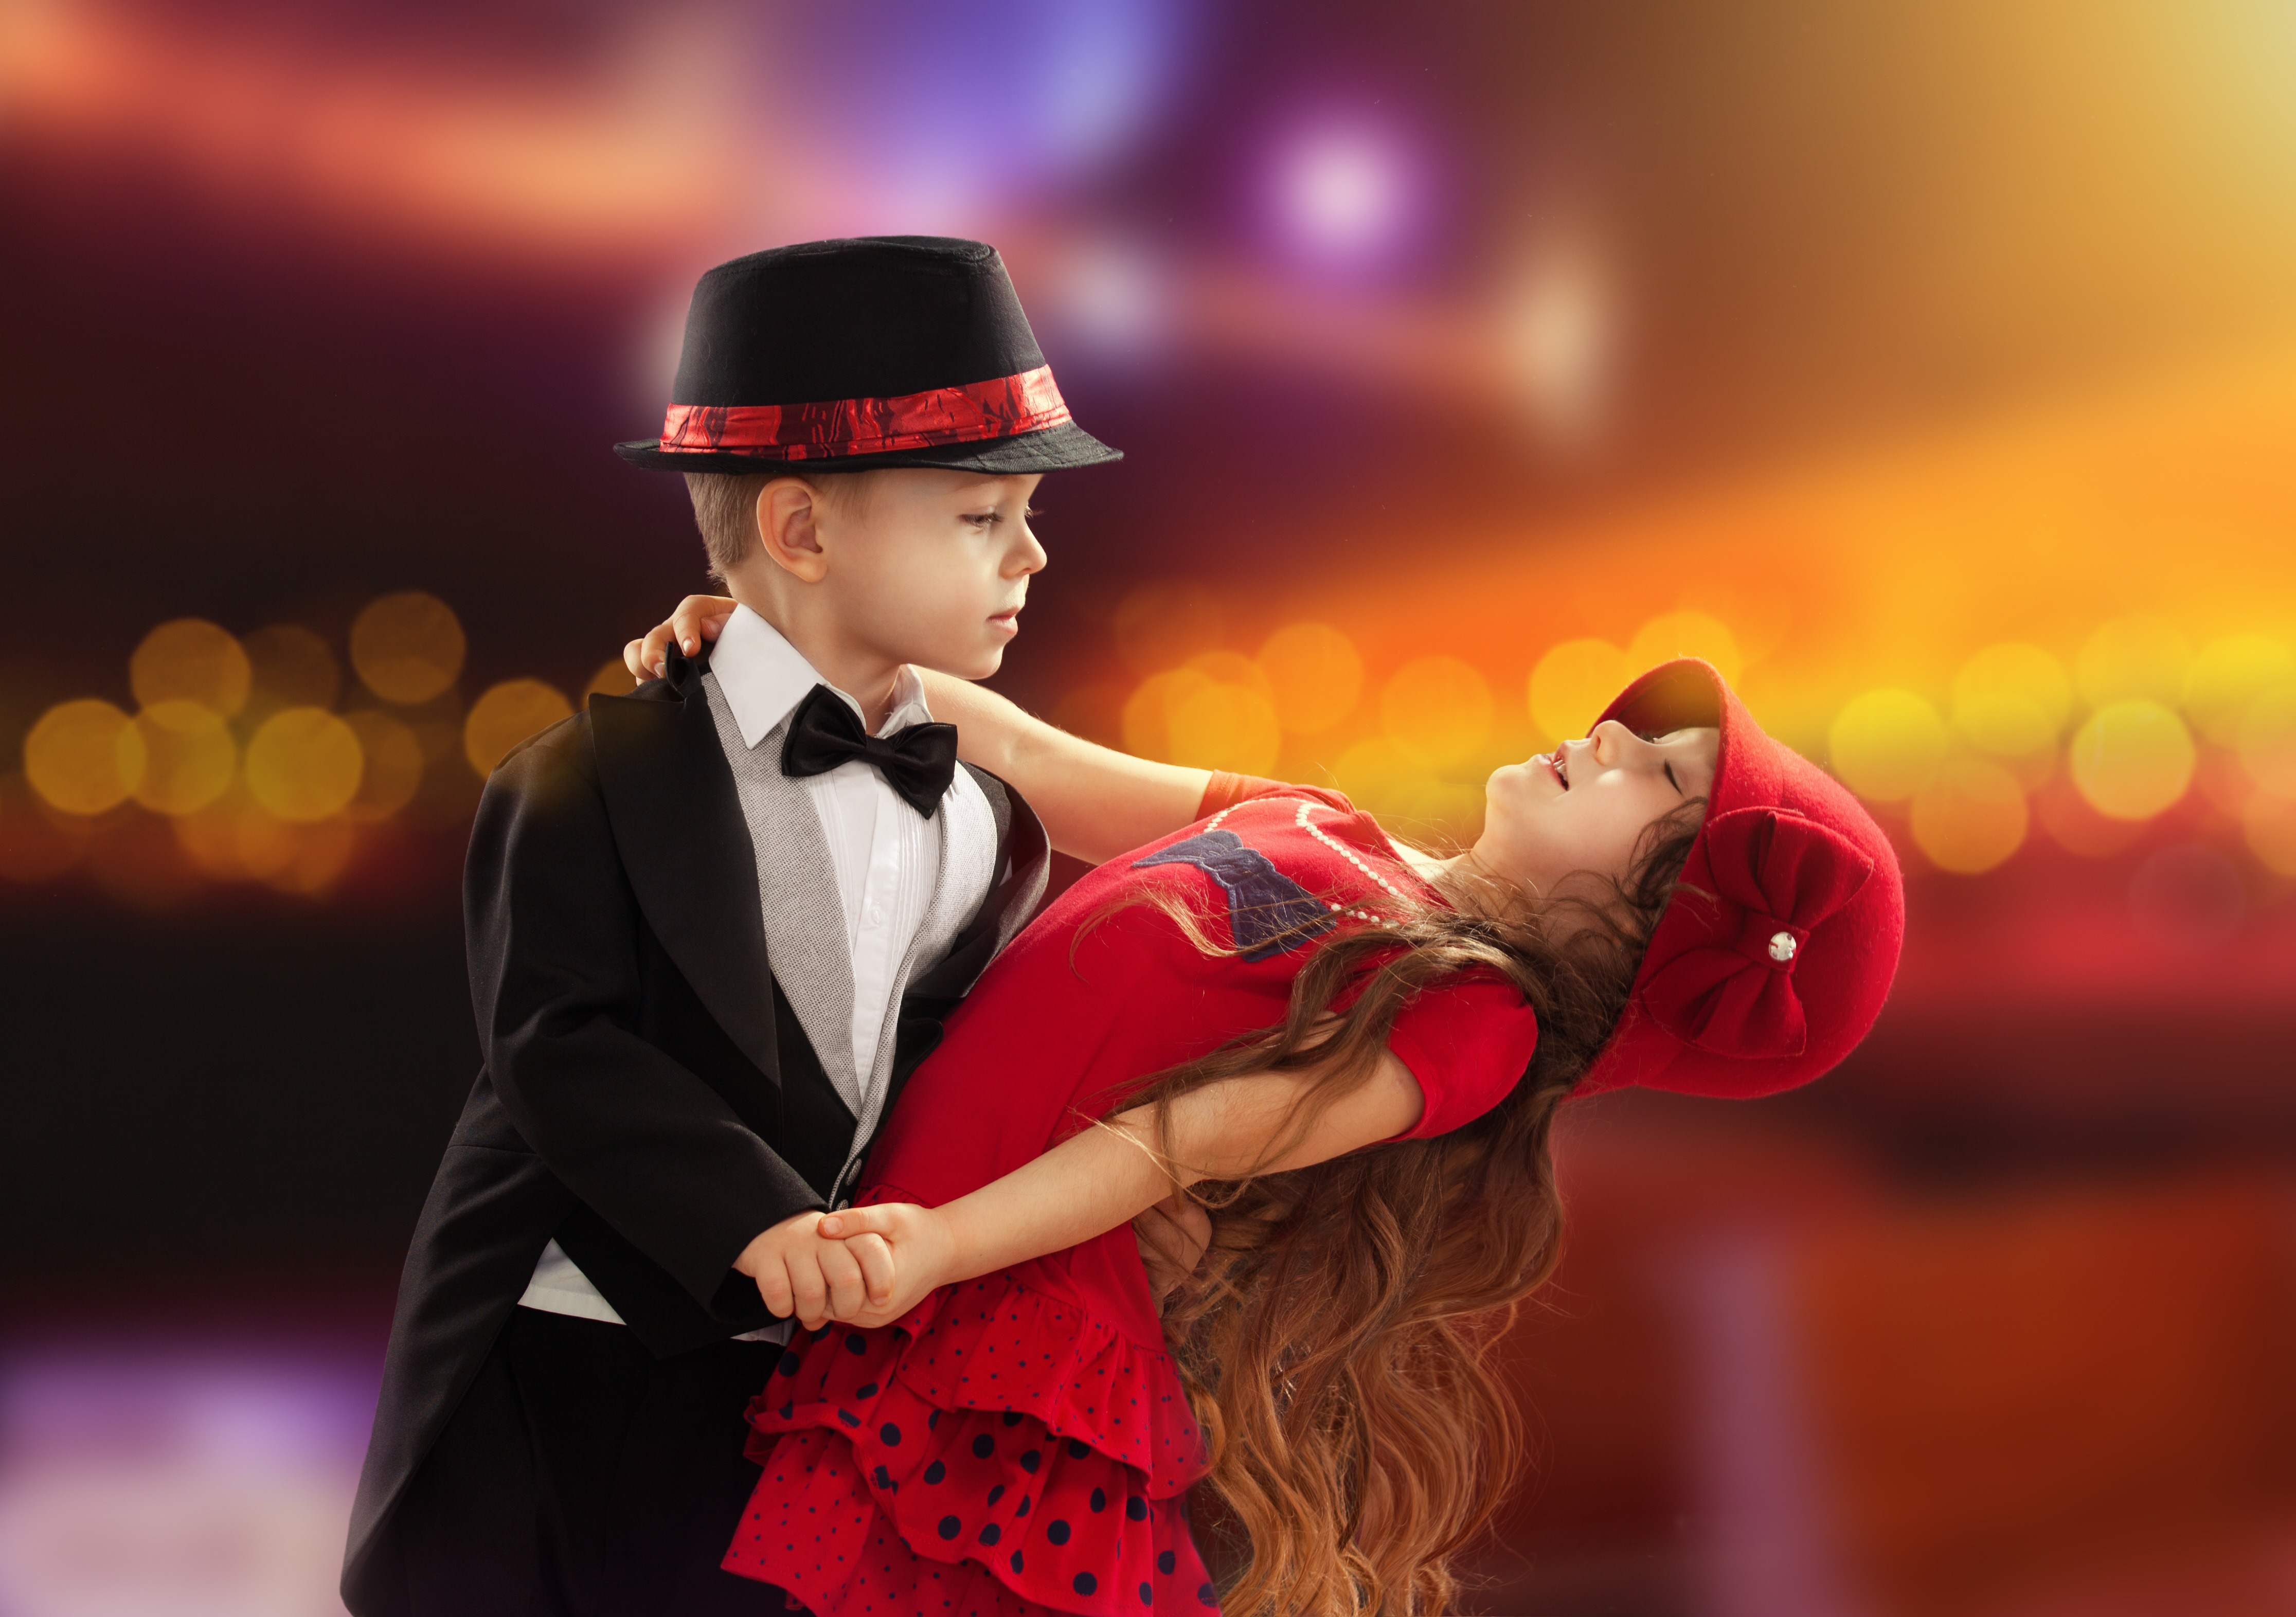 a young boy and girl ballroom dancing in fancy clothing